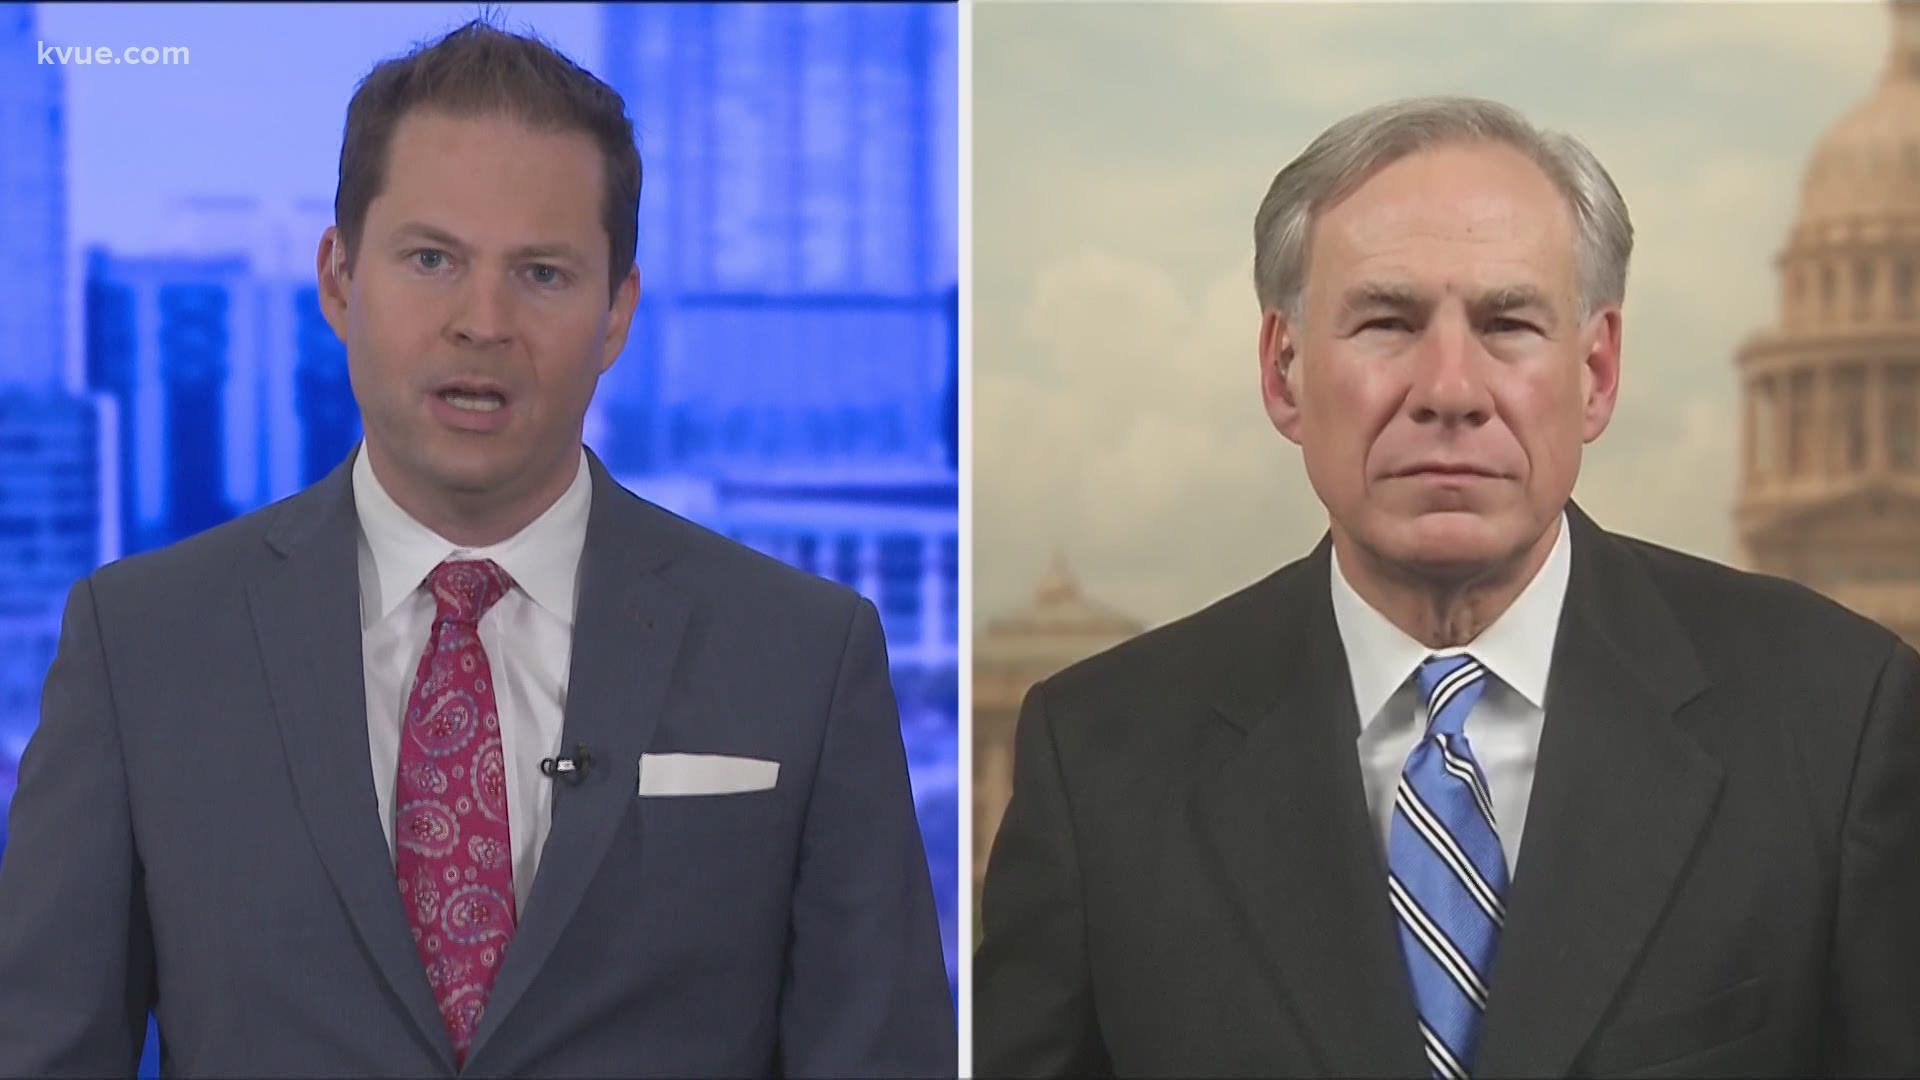 Gov. Greg Abbott defended lifting Texas's COVID-19 restrictions in an interview with KVUE. Masks will no longer be required and businesses can fully open.